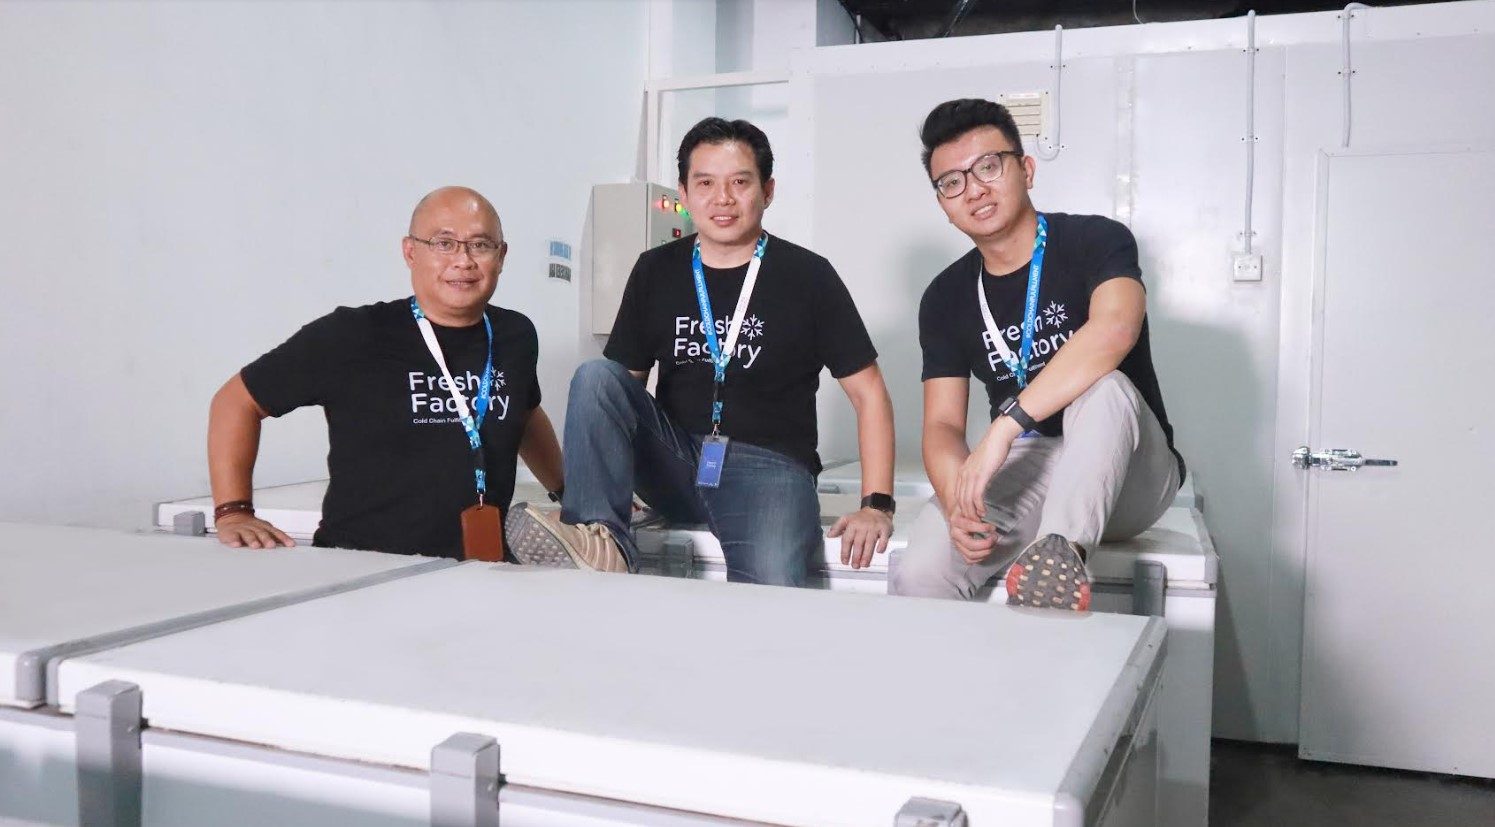 [Updated] Indonesian cold chain startup Fresh Factory raises $4.15m in new funding